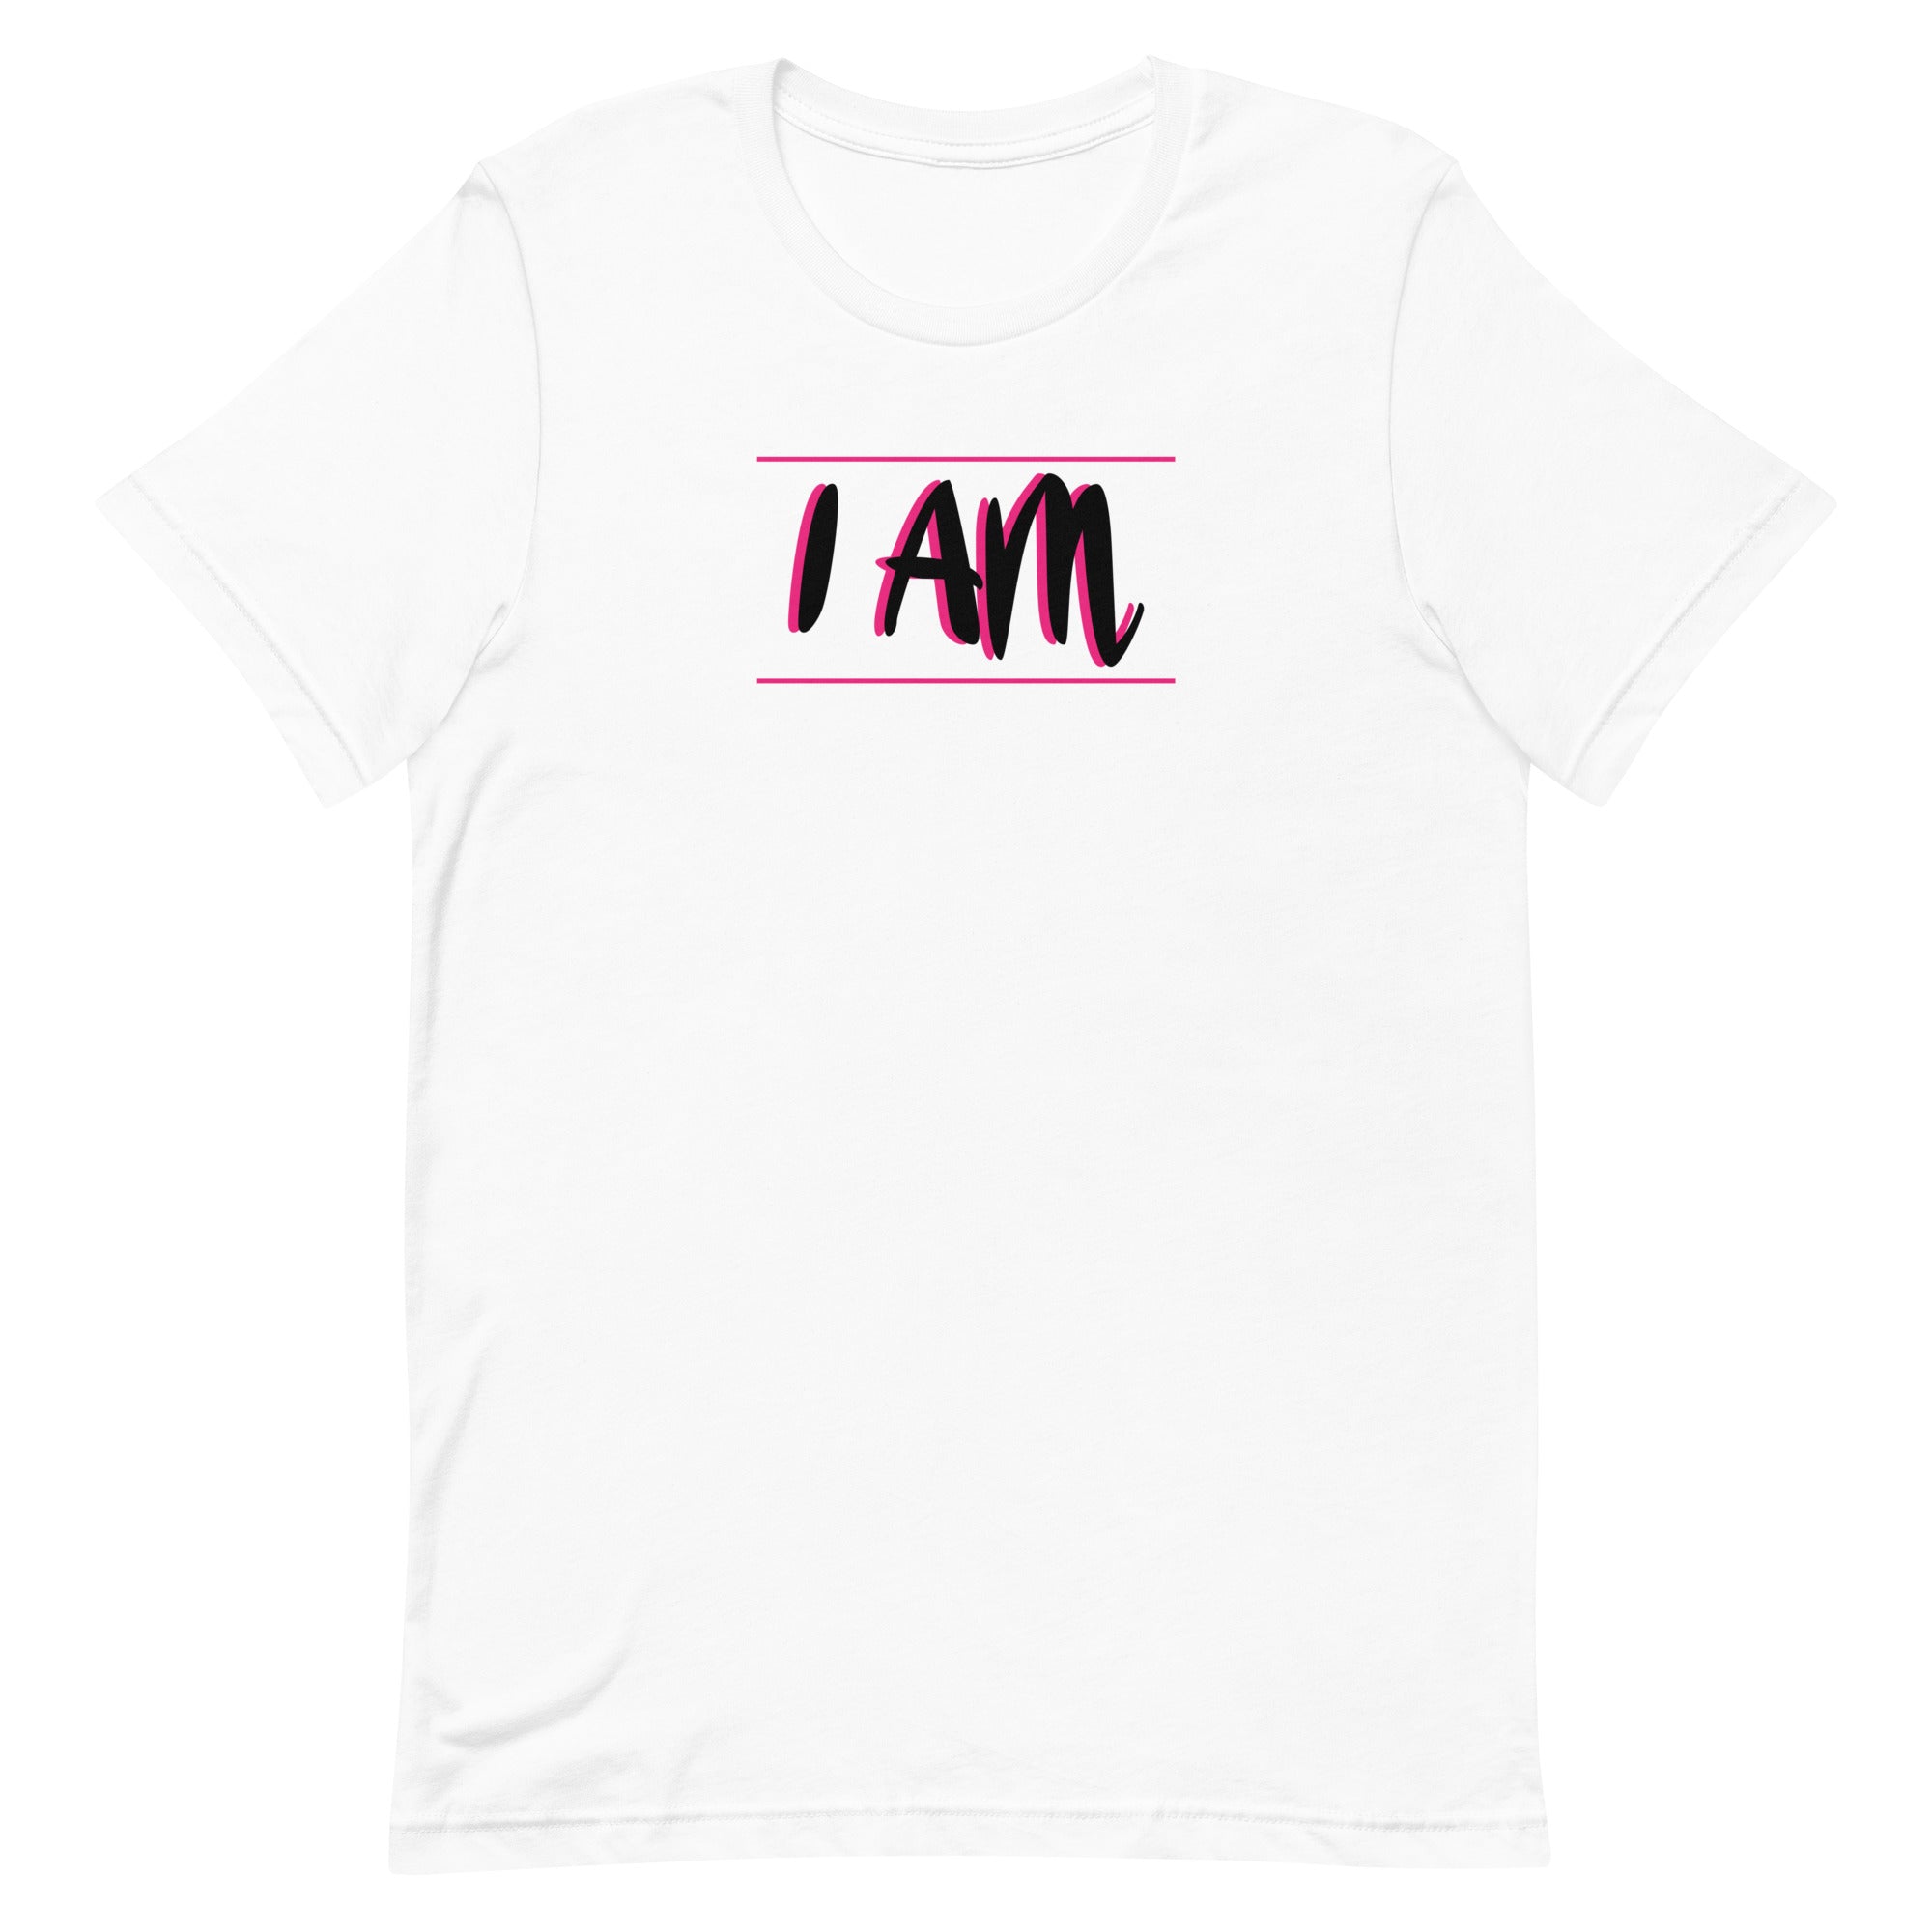 I AM - HER UNISEX FRONT AND BACK T-SHIRT